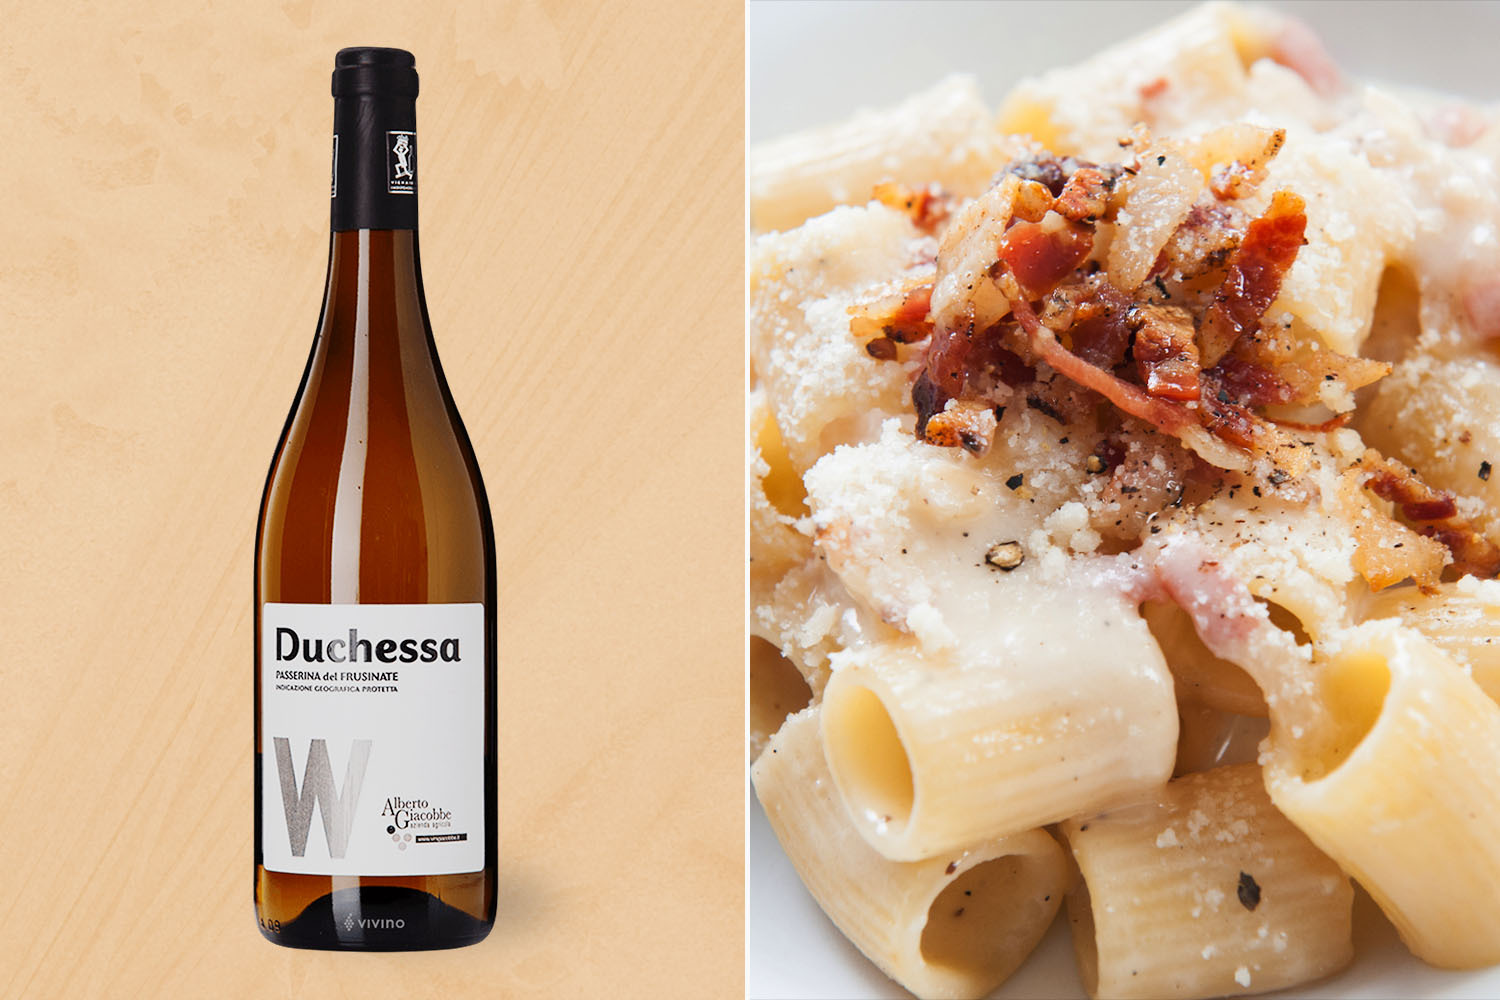 pasta alla gricia with a wine pairing